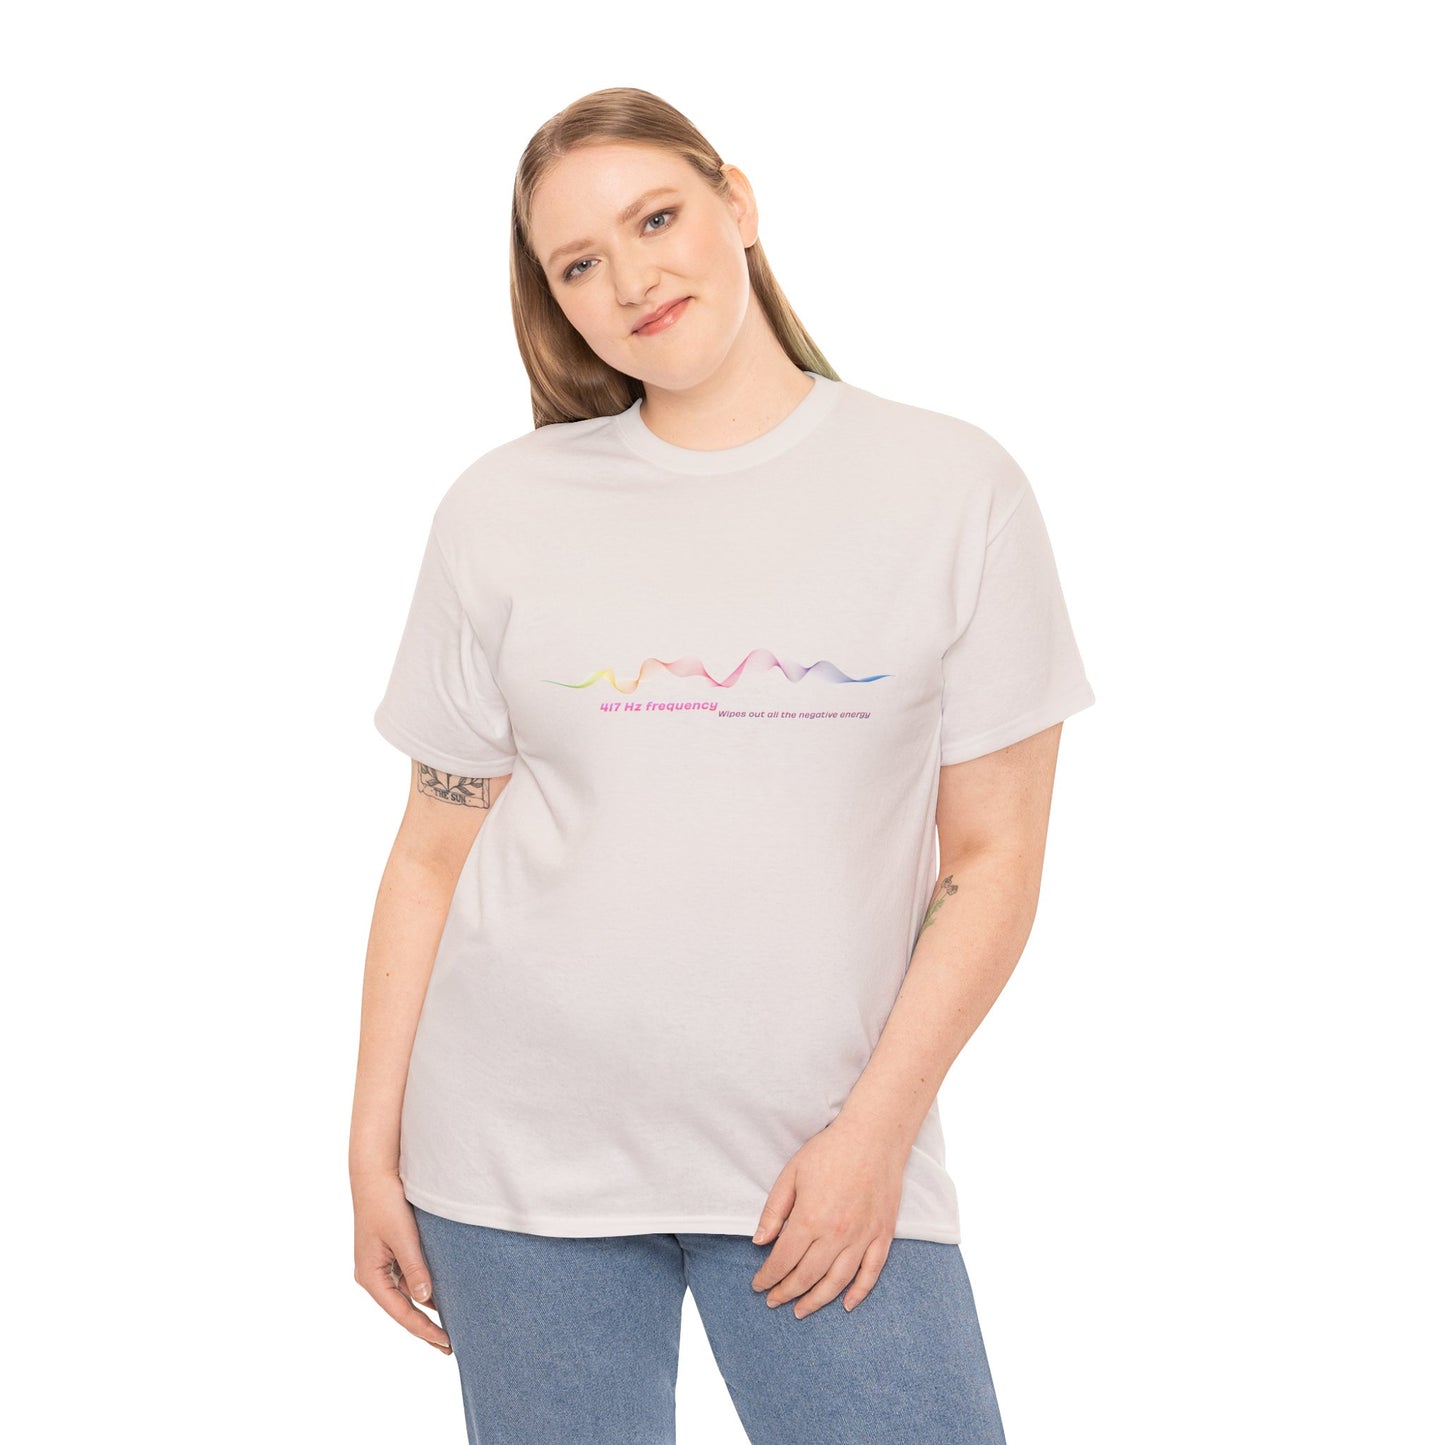 417 Hz Frequency T-Shirt